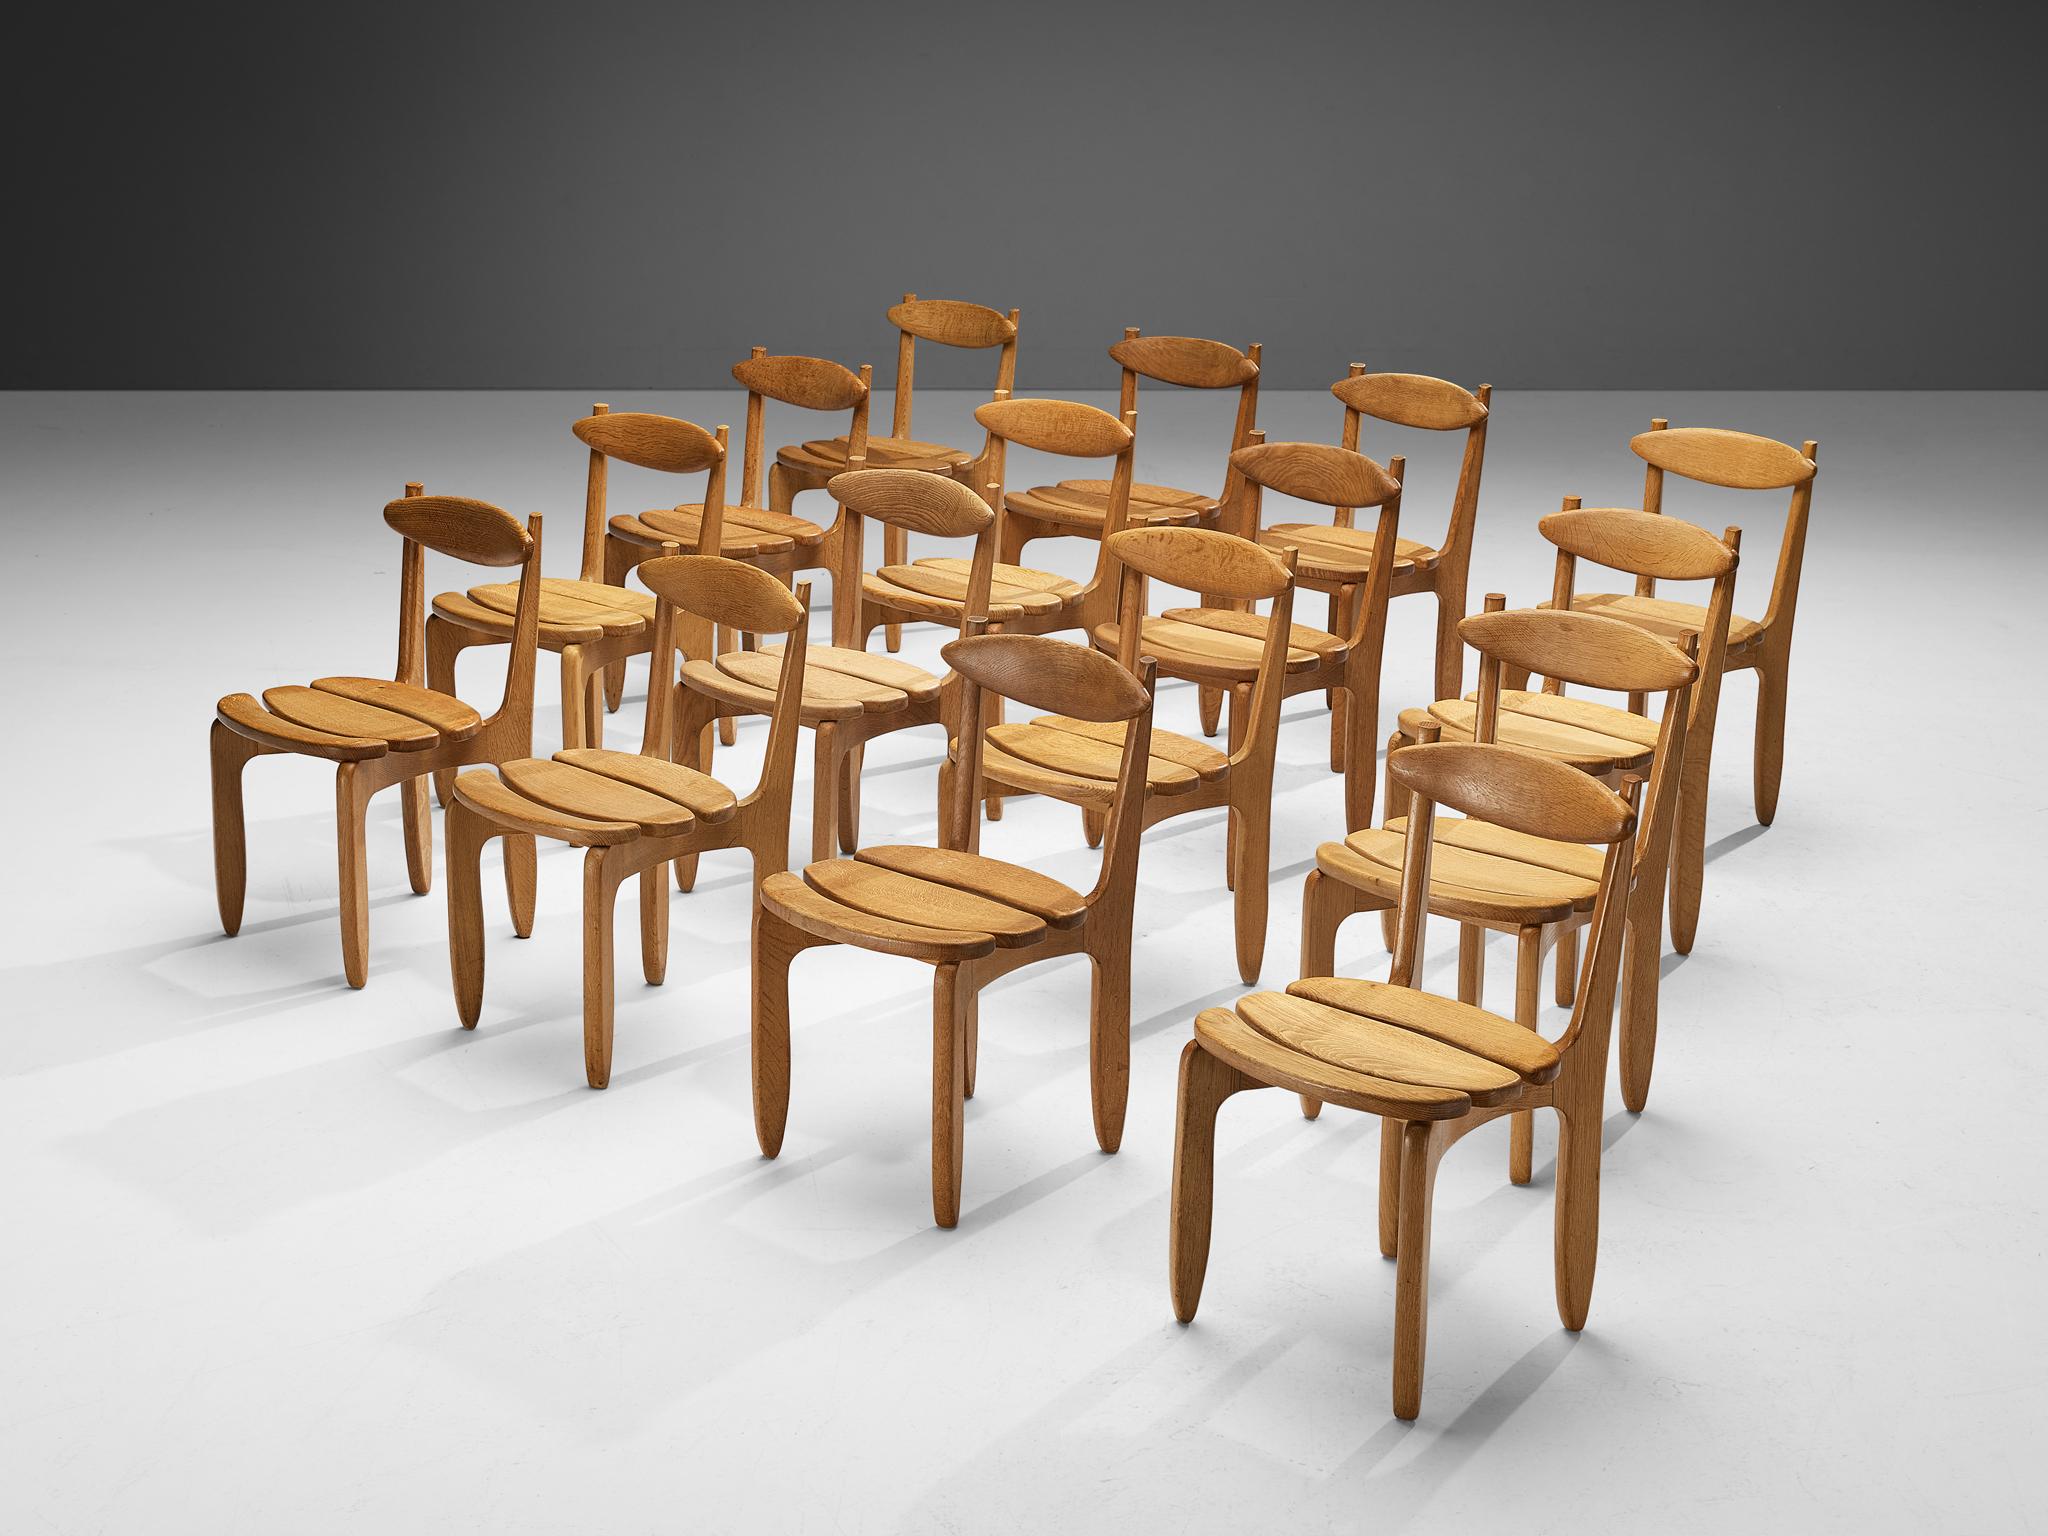 Guillerme et Chambron for Votre Maison, set of sixteen dining chairs, oak, France, 1960s.

Set of sixteen elegant and robust dining chairs in solid oak by Guillerme and Chambron. These chairs show the characteristic frame of this French designer